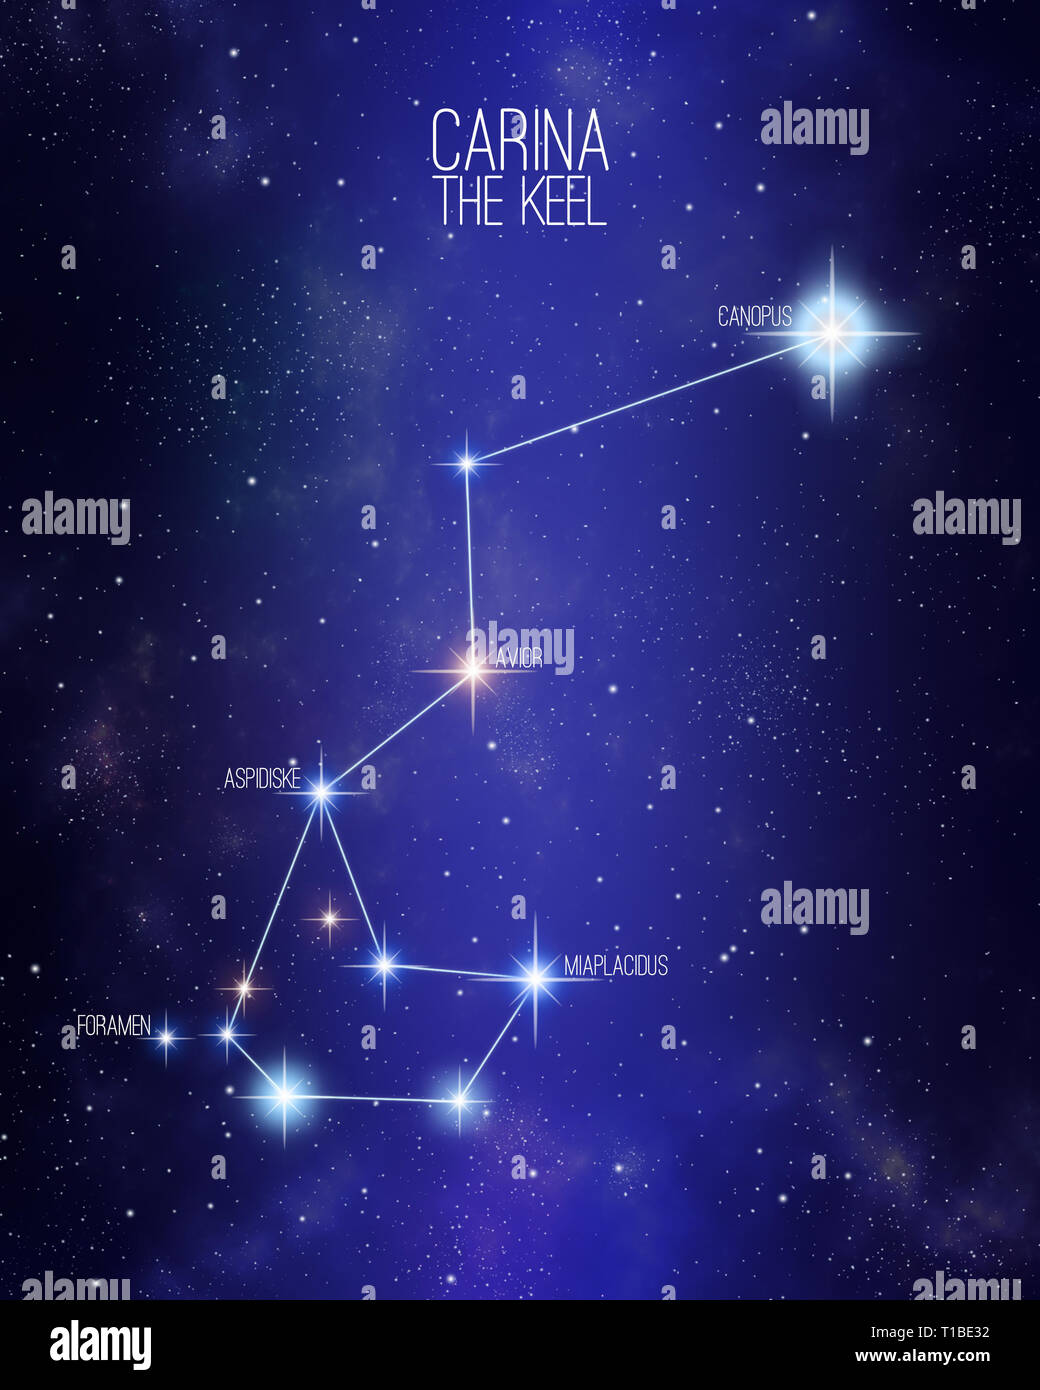 Carina the keel constellation on a starry space background with the names of its main stars. Relative sizes and different color shades based on the sp Stock Photo